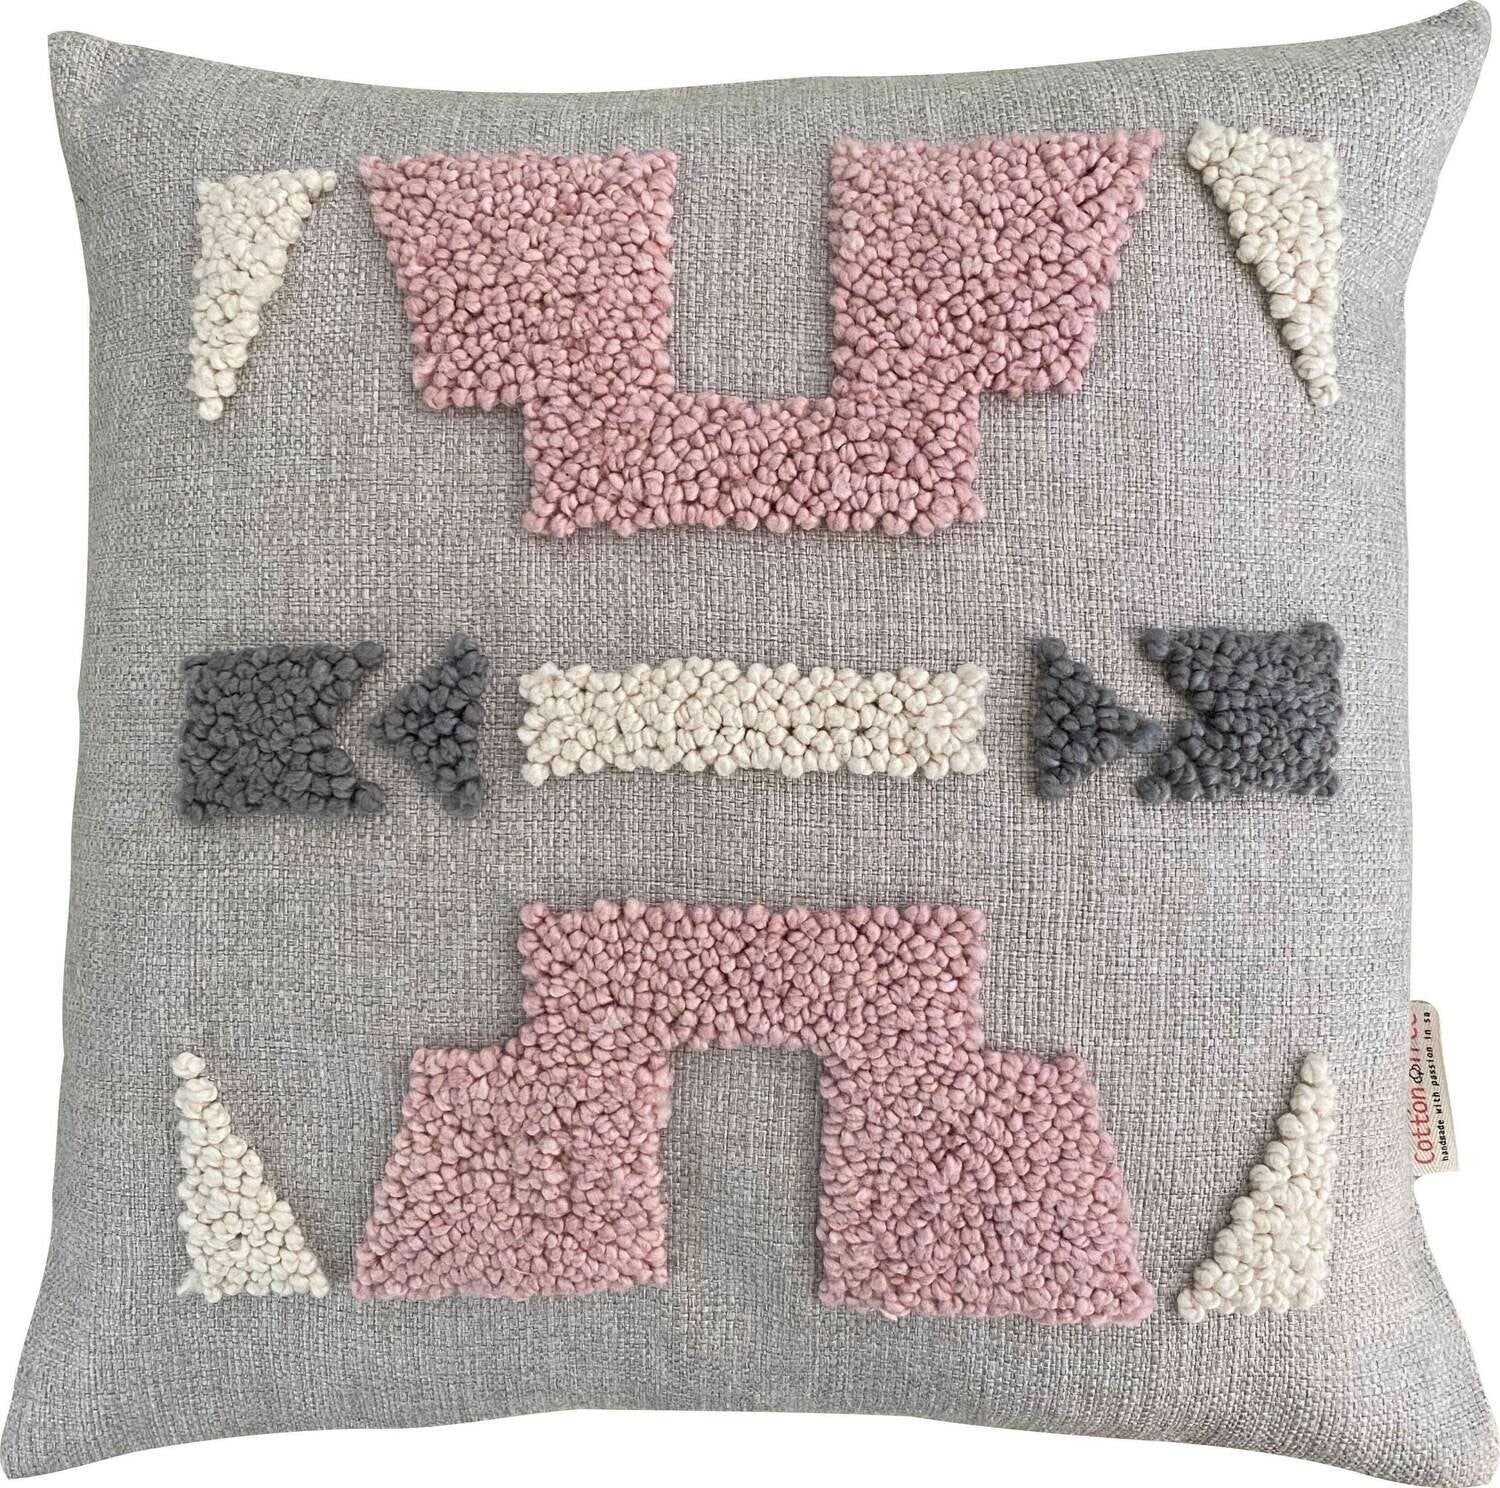 Scatter_Cushion_Punchneedle_African_Ndebele_Natural_Charcoal_Pink